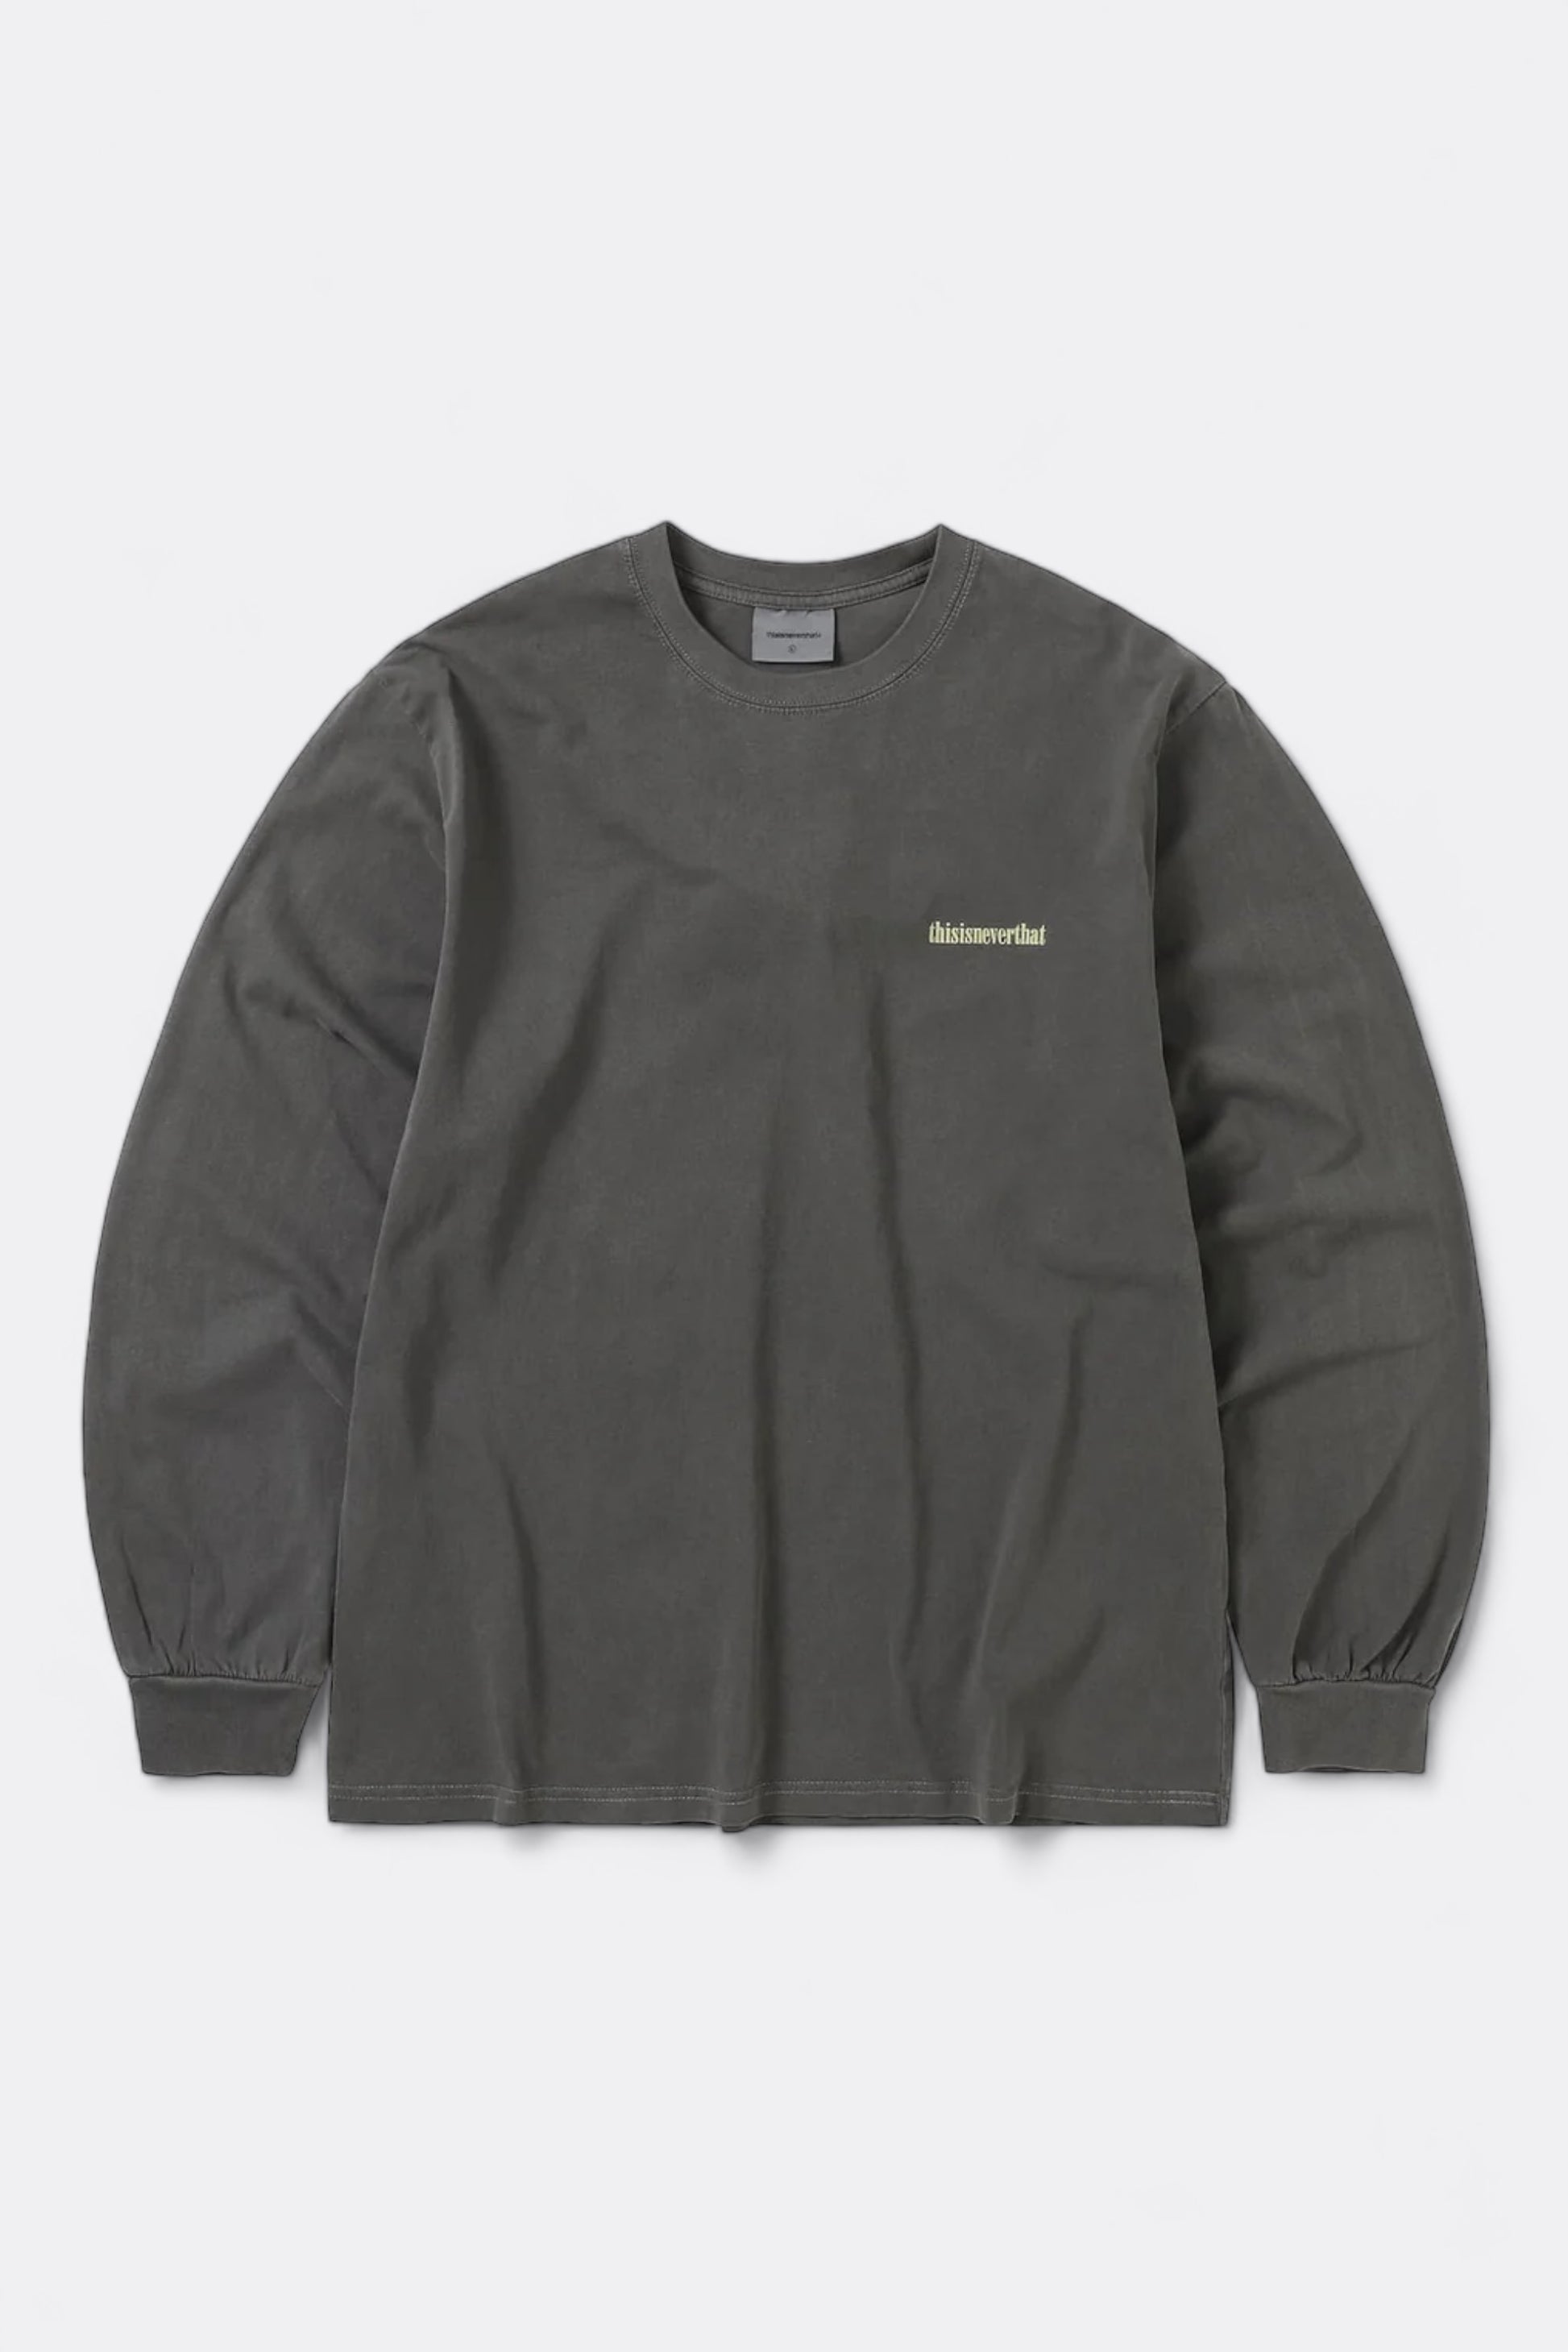 thisisneverthat - Flame Onyx L/S Tee (Charcoal)